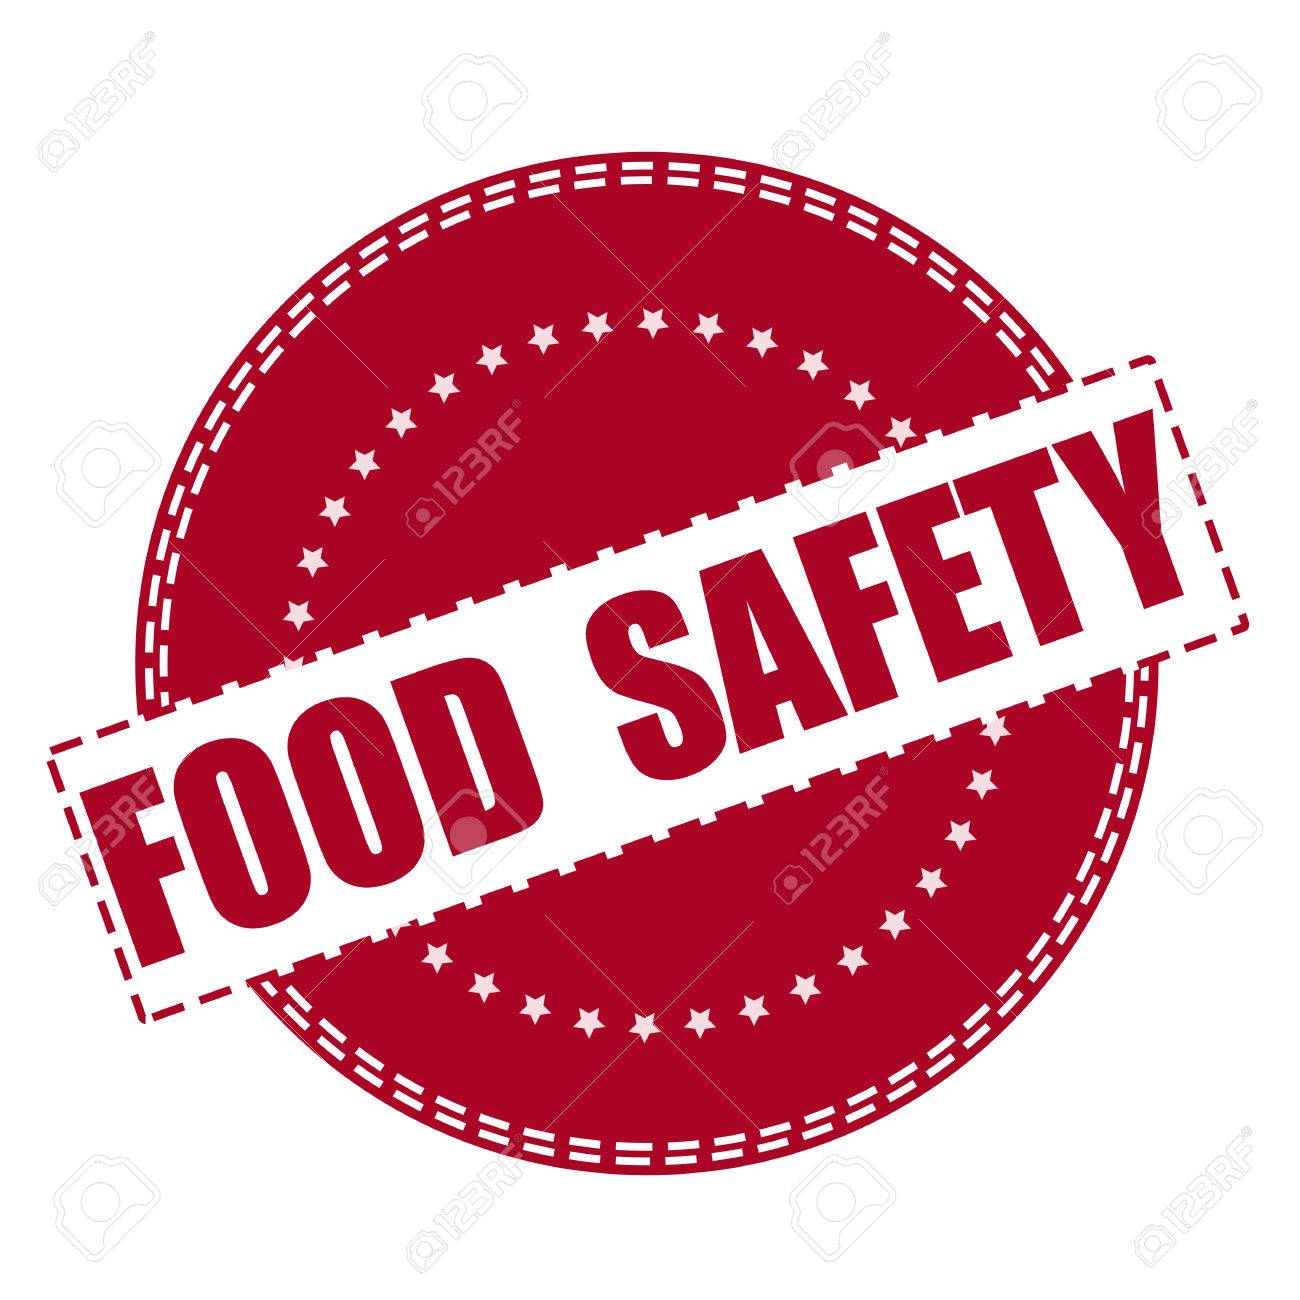 food safety grunge stamp with on vector illustration.